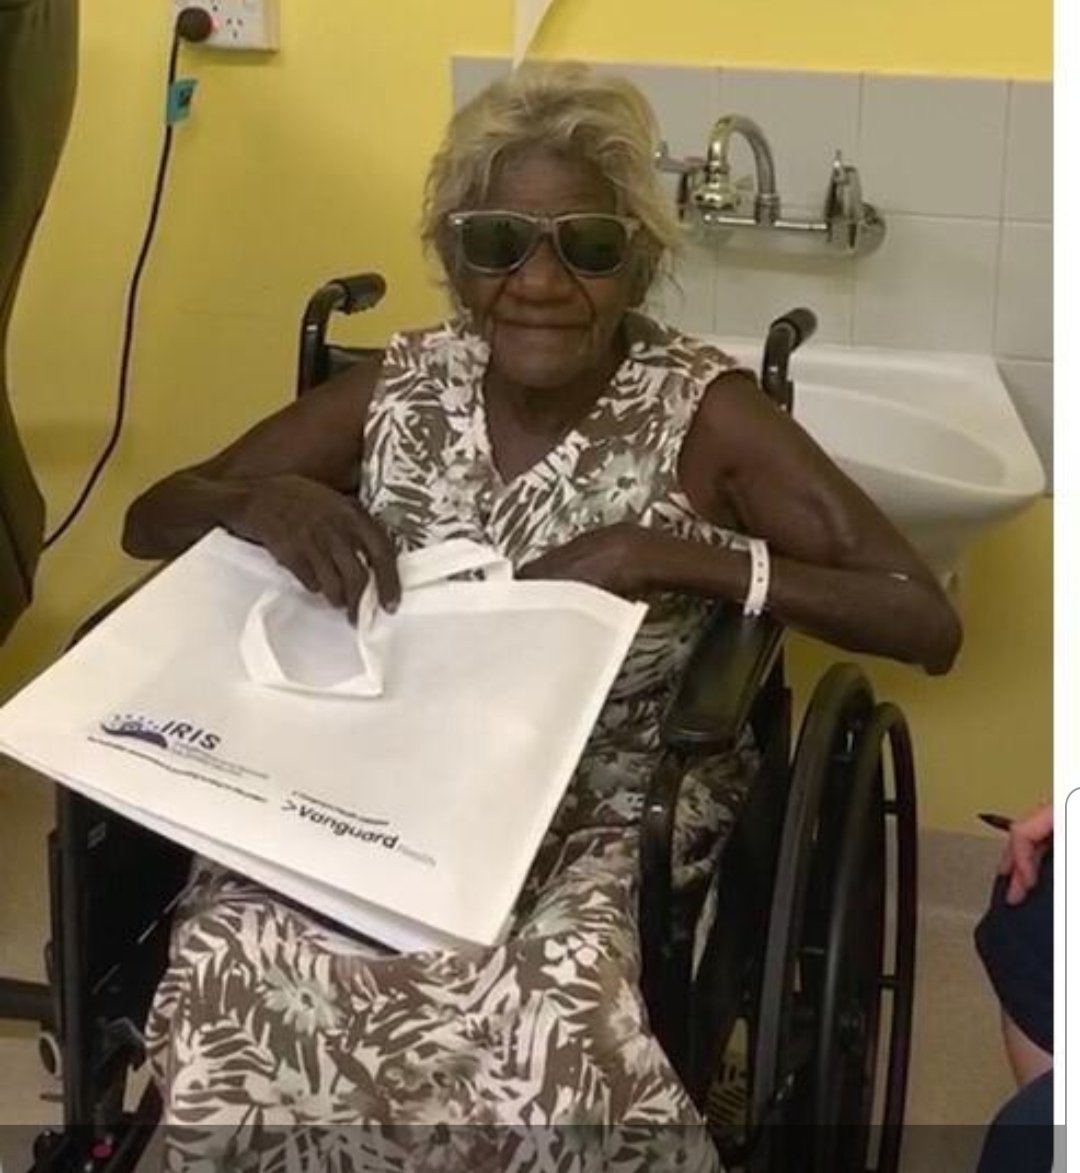 Congrats IRIS 2.0 👏
300 cataracts done & 100 booked for Feb.
A directive of @GregHuntMP to target remote cataract blindness. Broome, Kununurra, Alice, Katherine, Gove, Rocky, Woorabinda, Bourke, Bathurst, Dubbo & Tennant.
Marie was scared; Valmai said she would dance tonight!😆